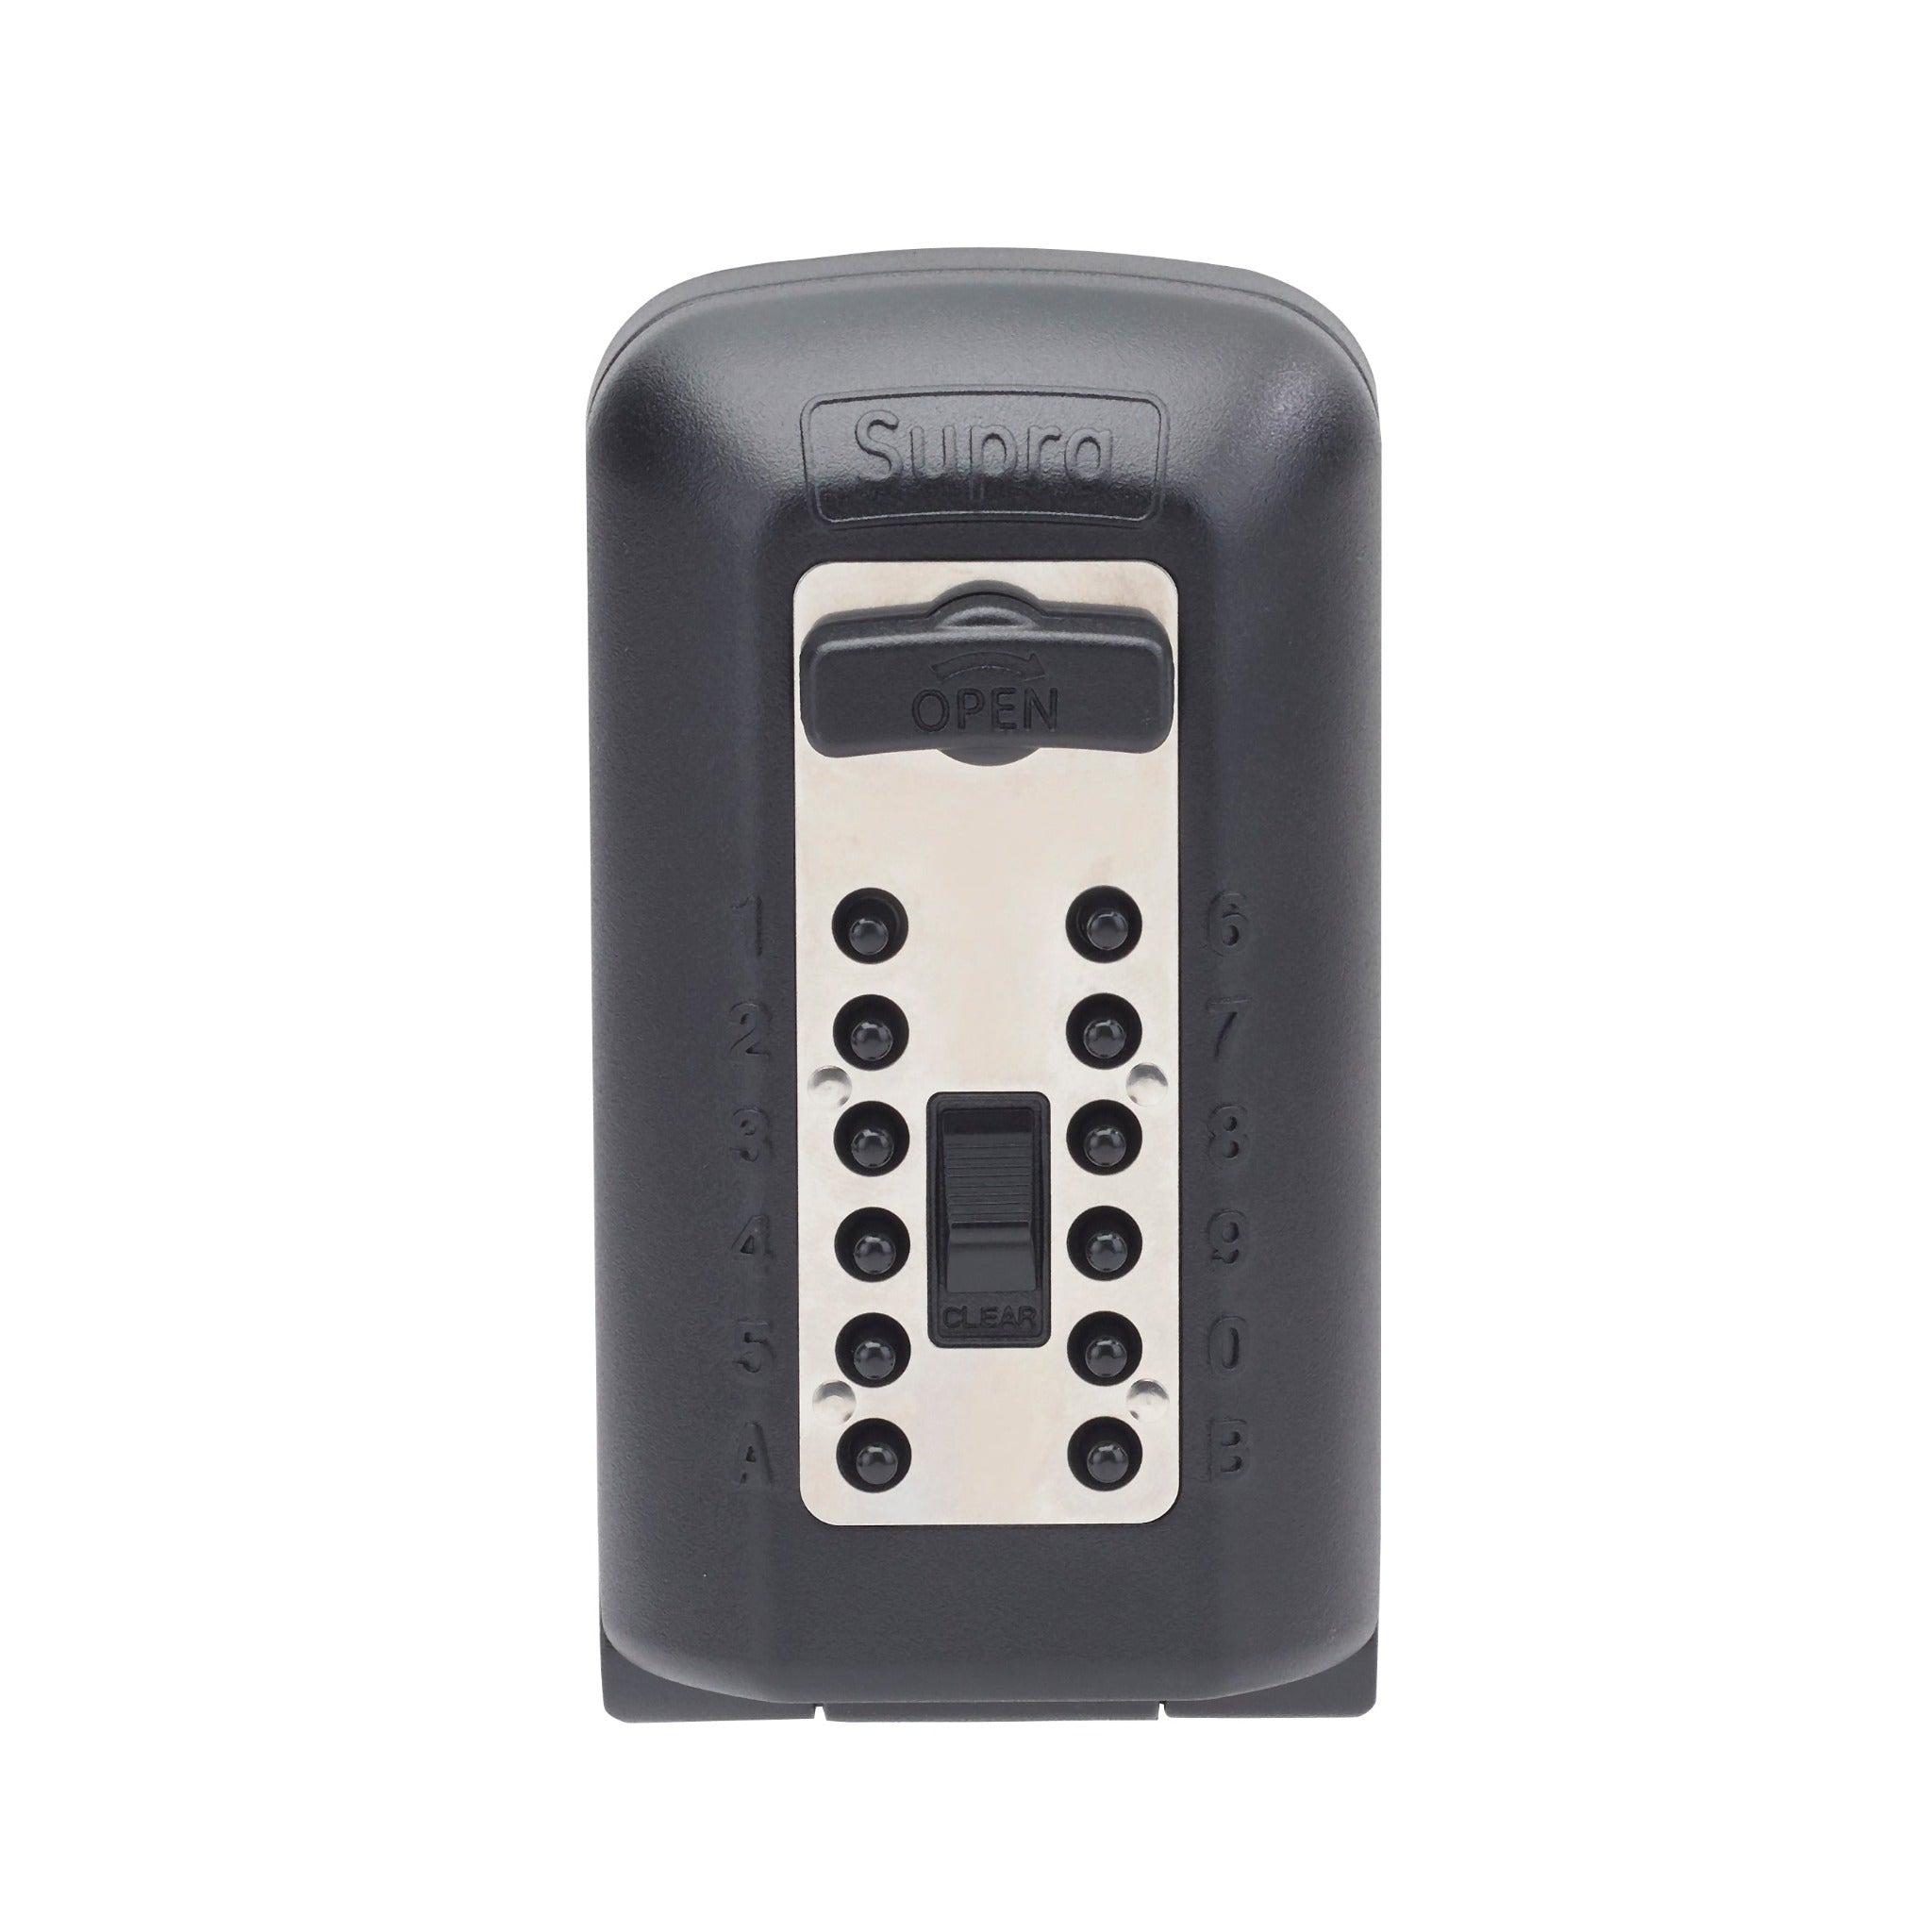 Police preferred Supra P500 Pro key safe closed showing digits 0-9 and A B buttons